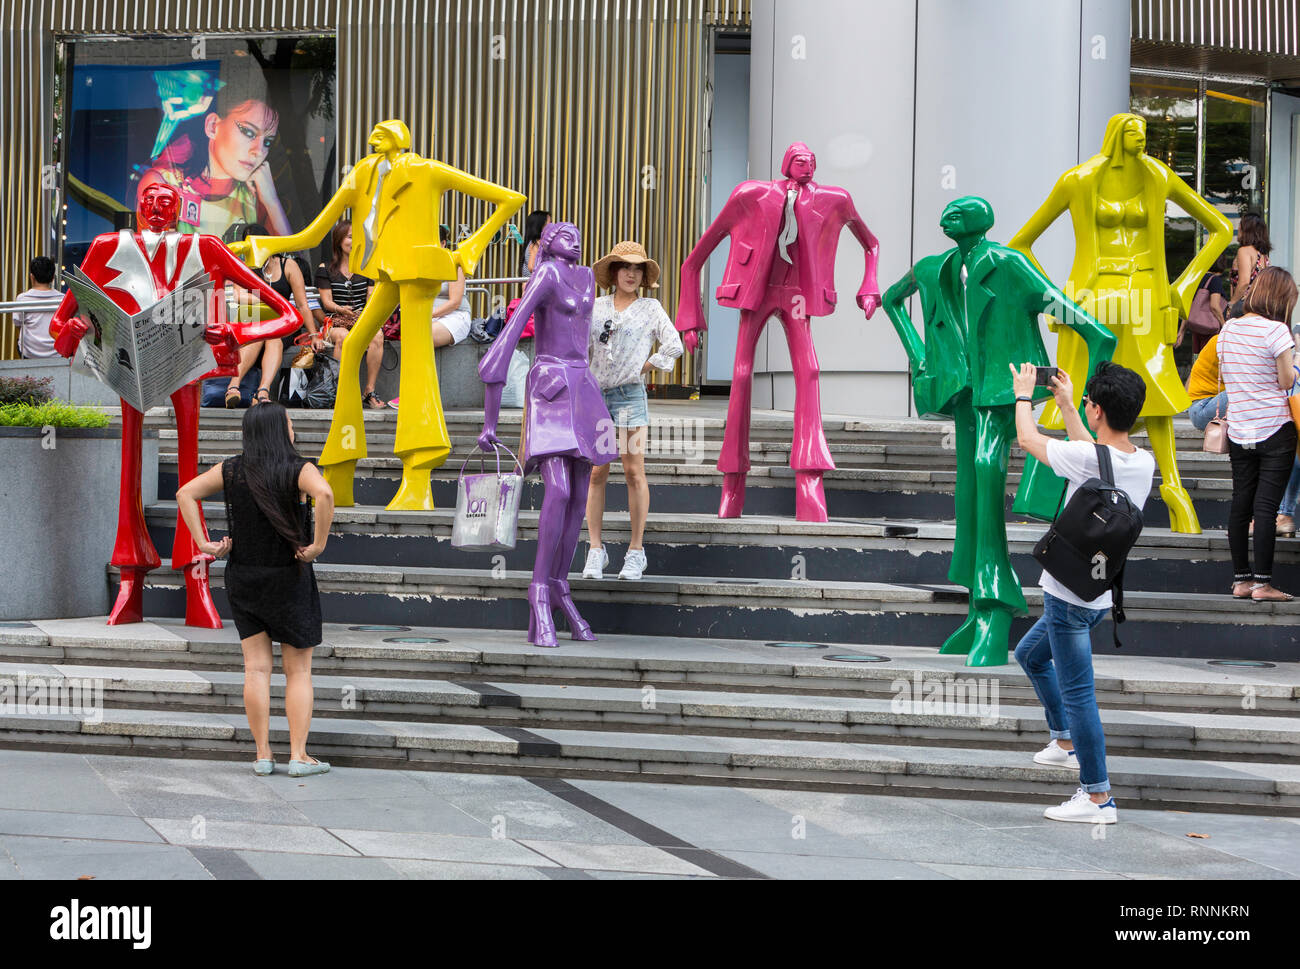 Shoppers Making Photos by Modern Fashion Sculptures outside ION Mall, Singapore, Orchard Road Street Scene.  Urban People by Kurt Lorenz Metzler. Stock Photo